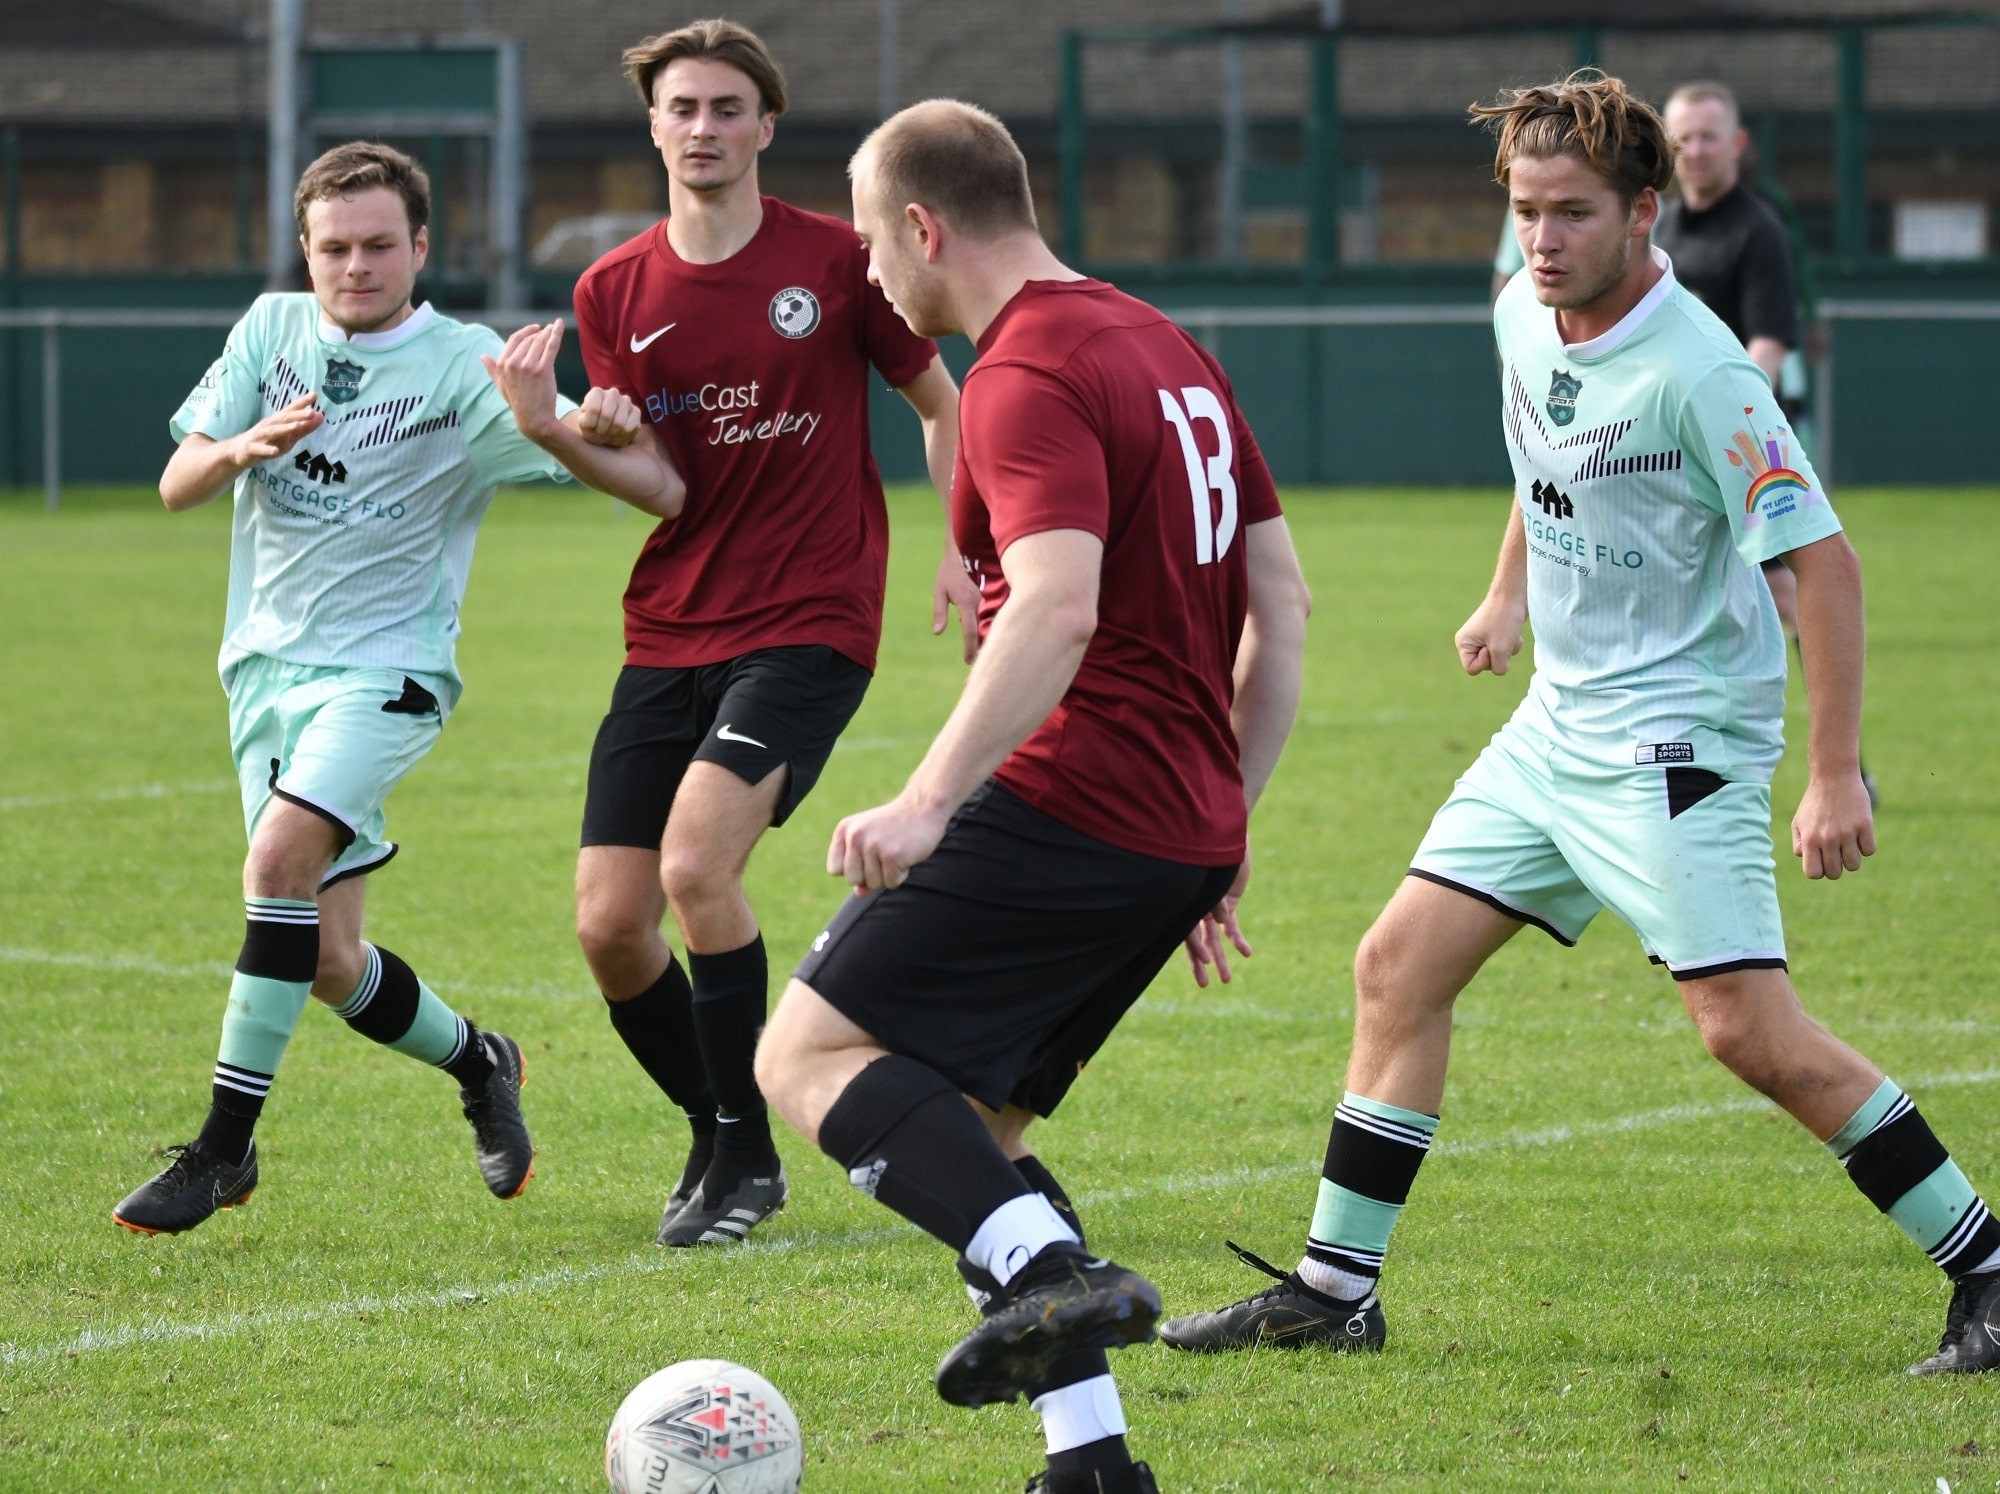 WEEK 5 REVIEW: Round-up of all the Corinthian League action from the weekend